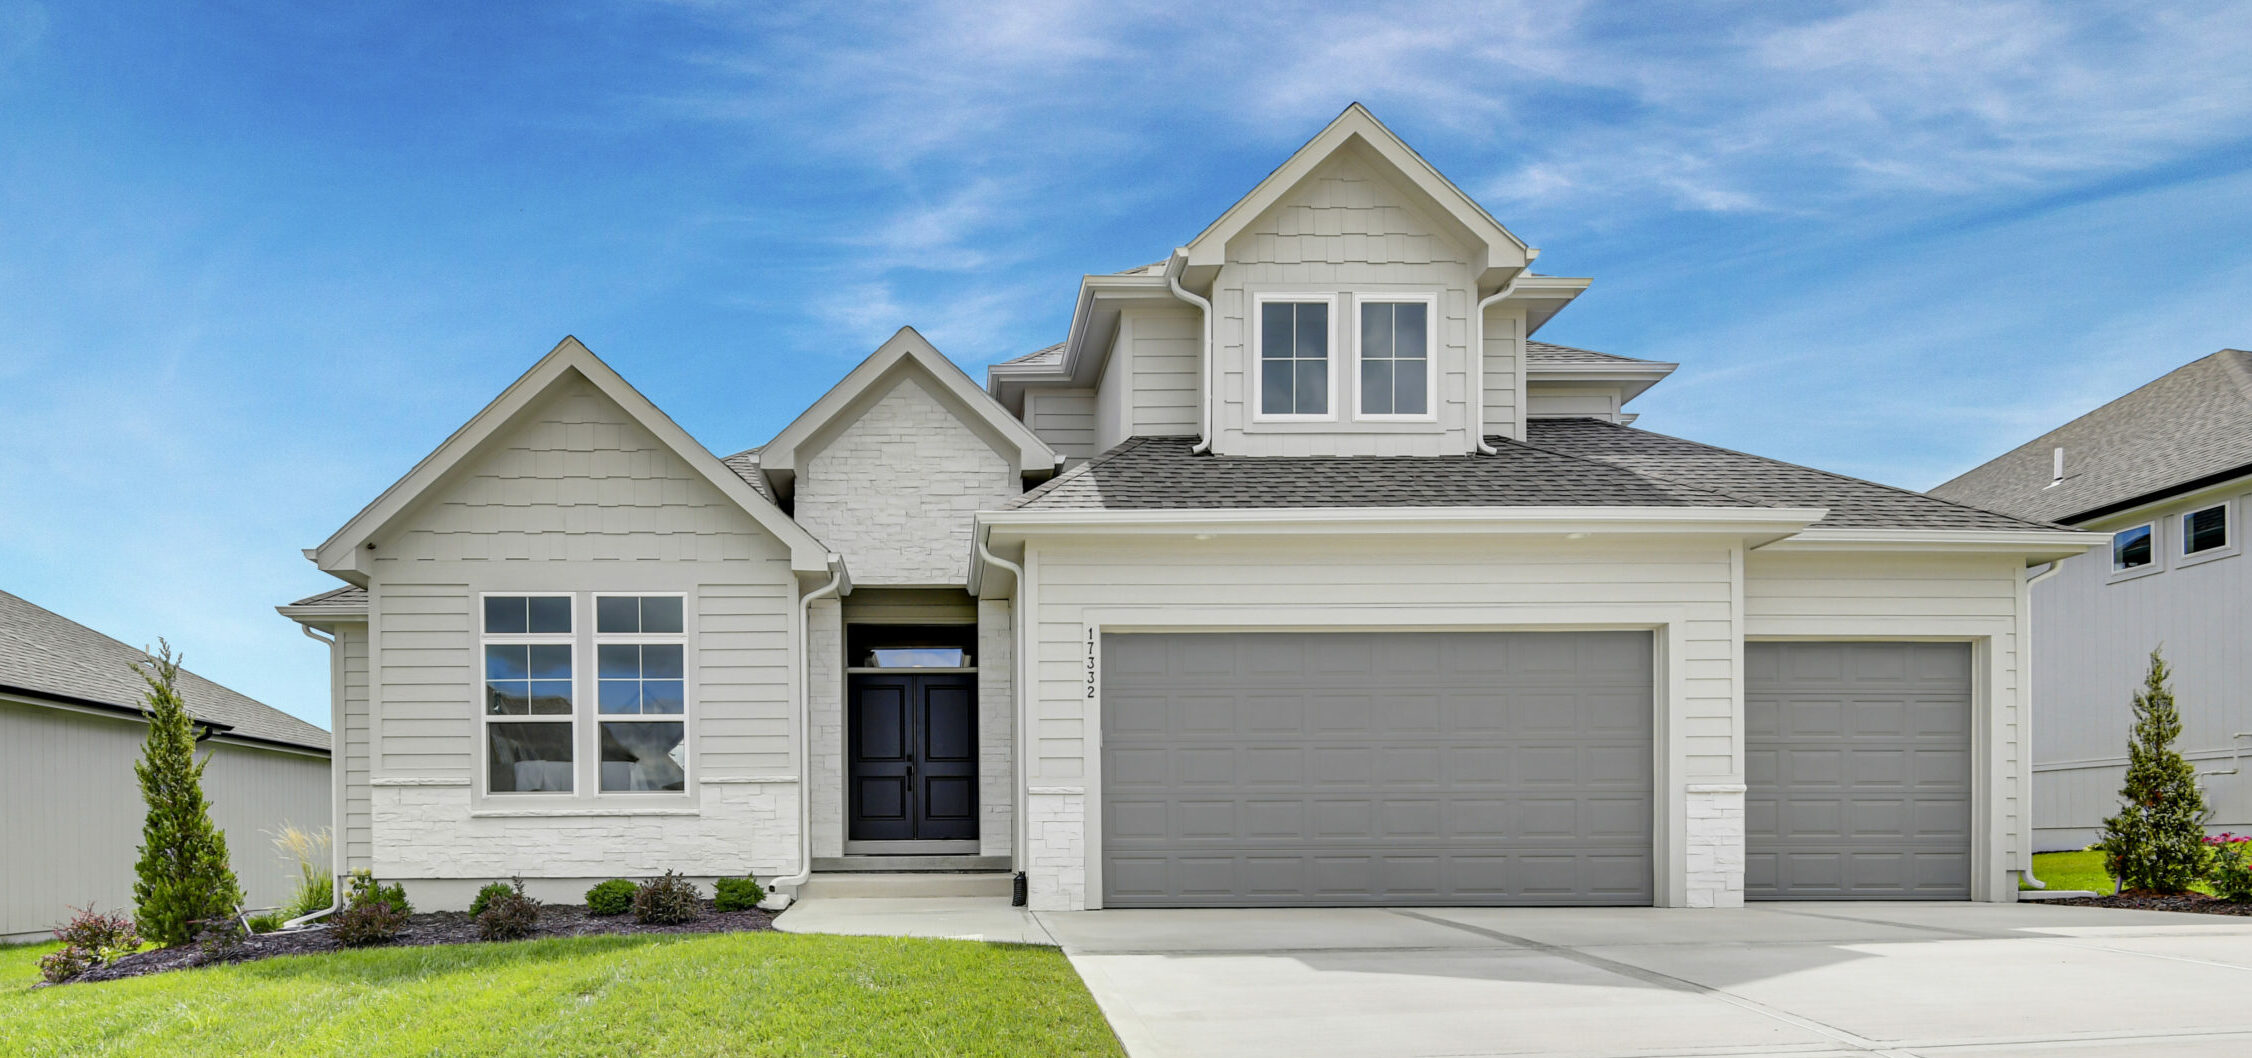 A frontal view of the Varese Expanded home plan, located in Coventry Valley.